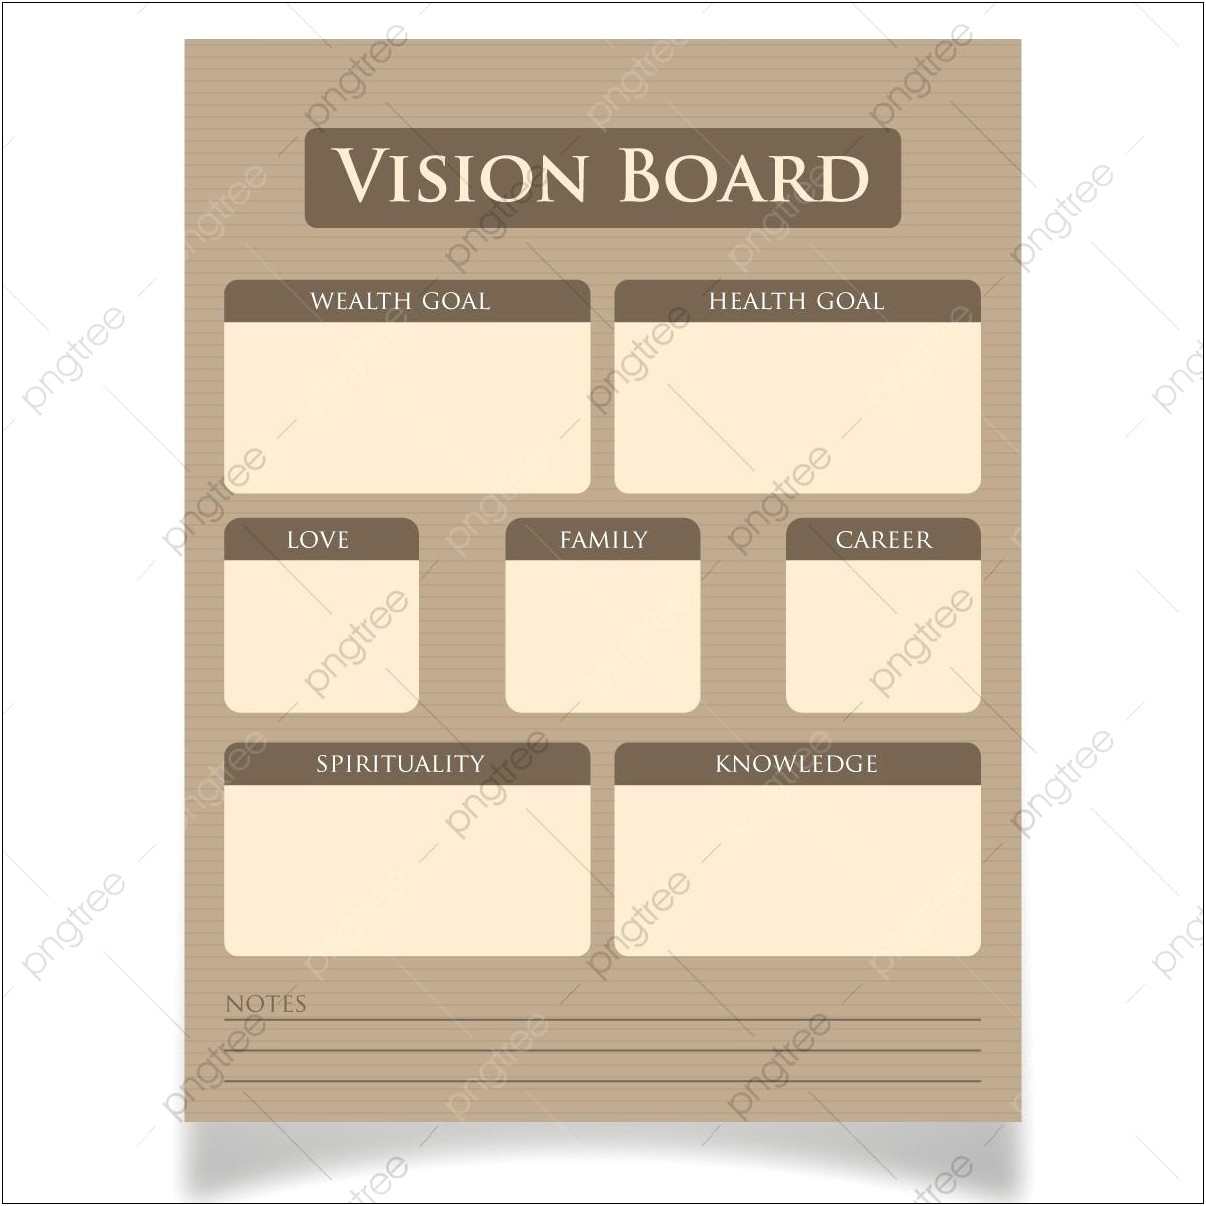 free-vision-board-party-invitation-template-templates-resume